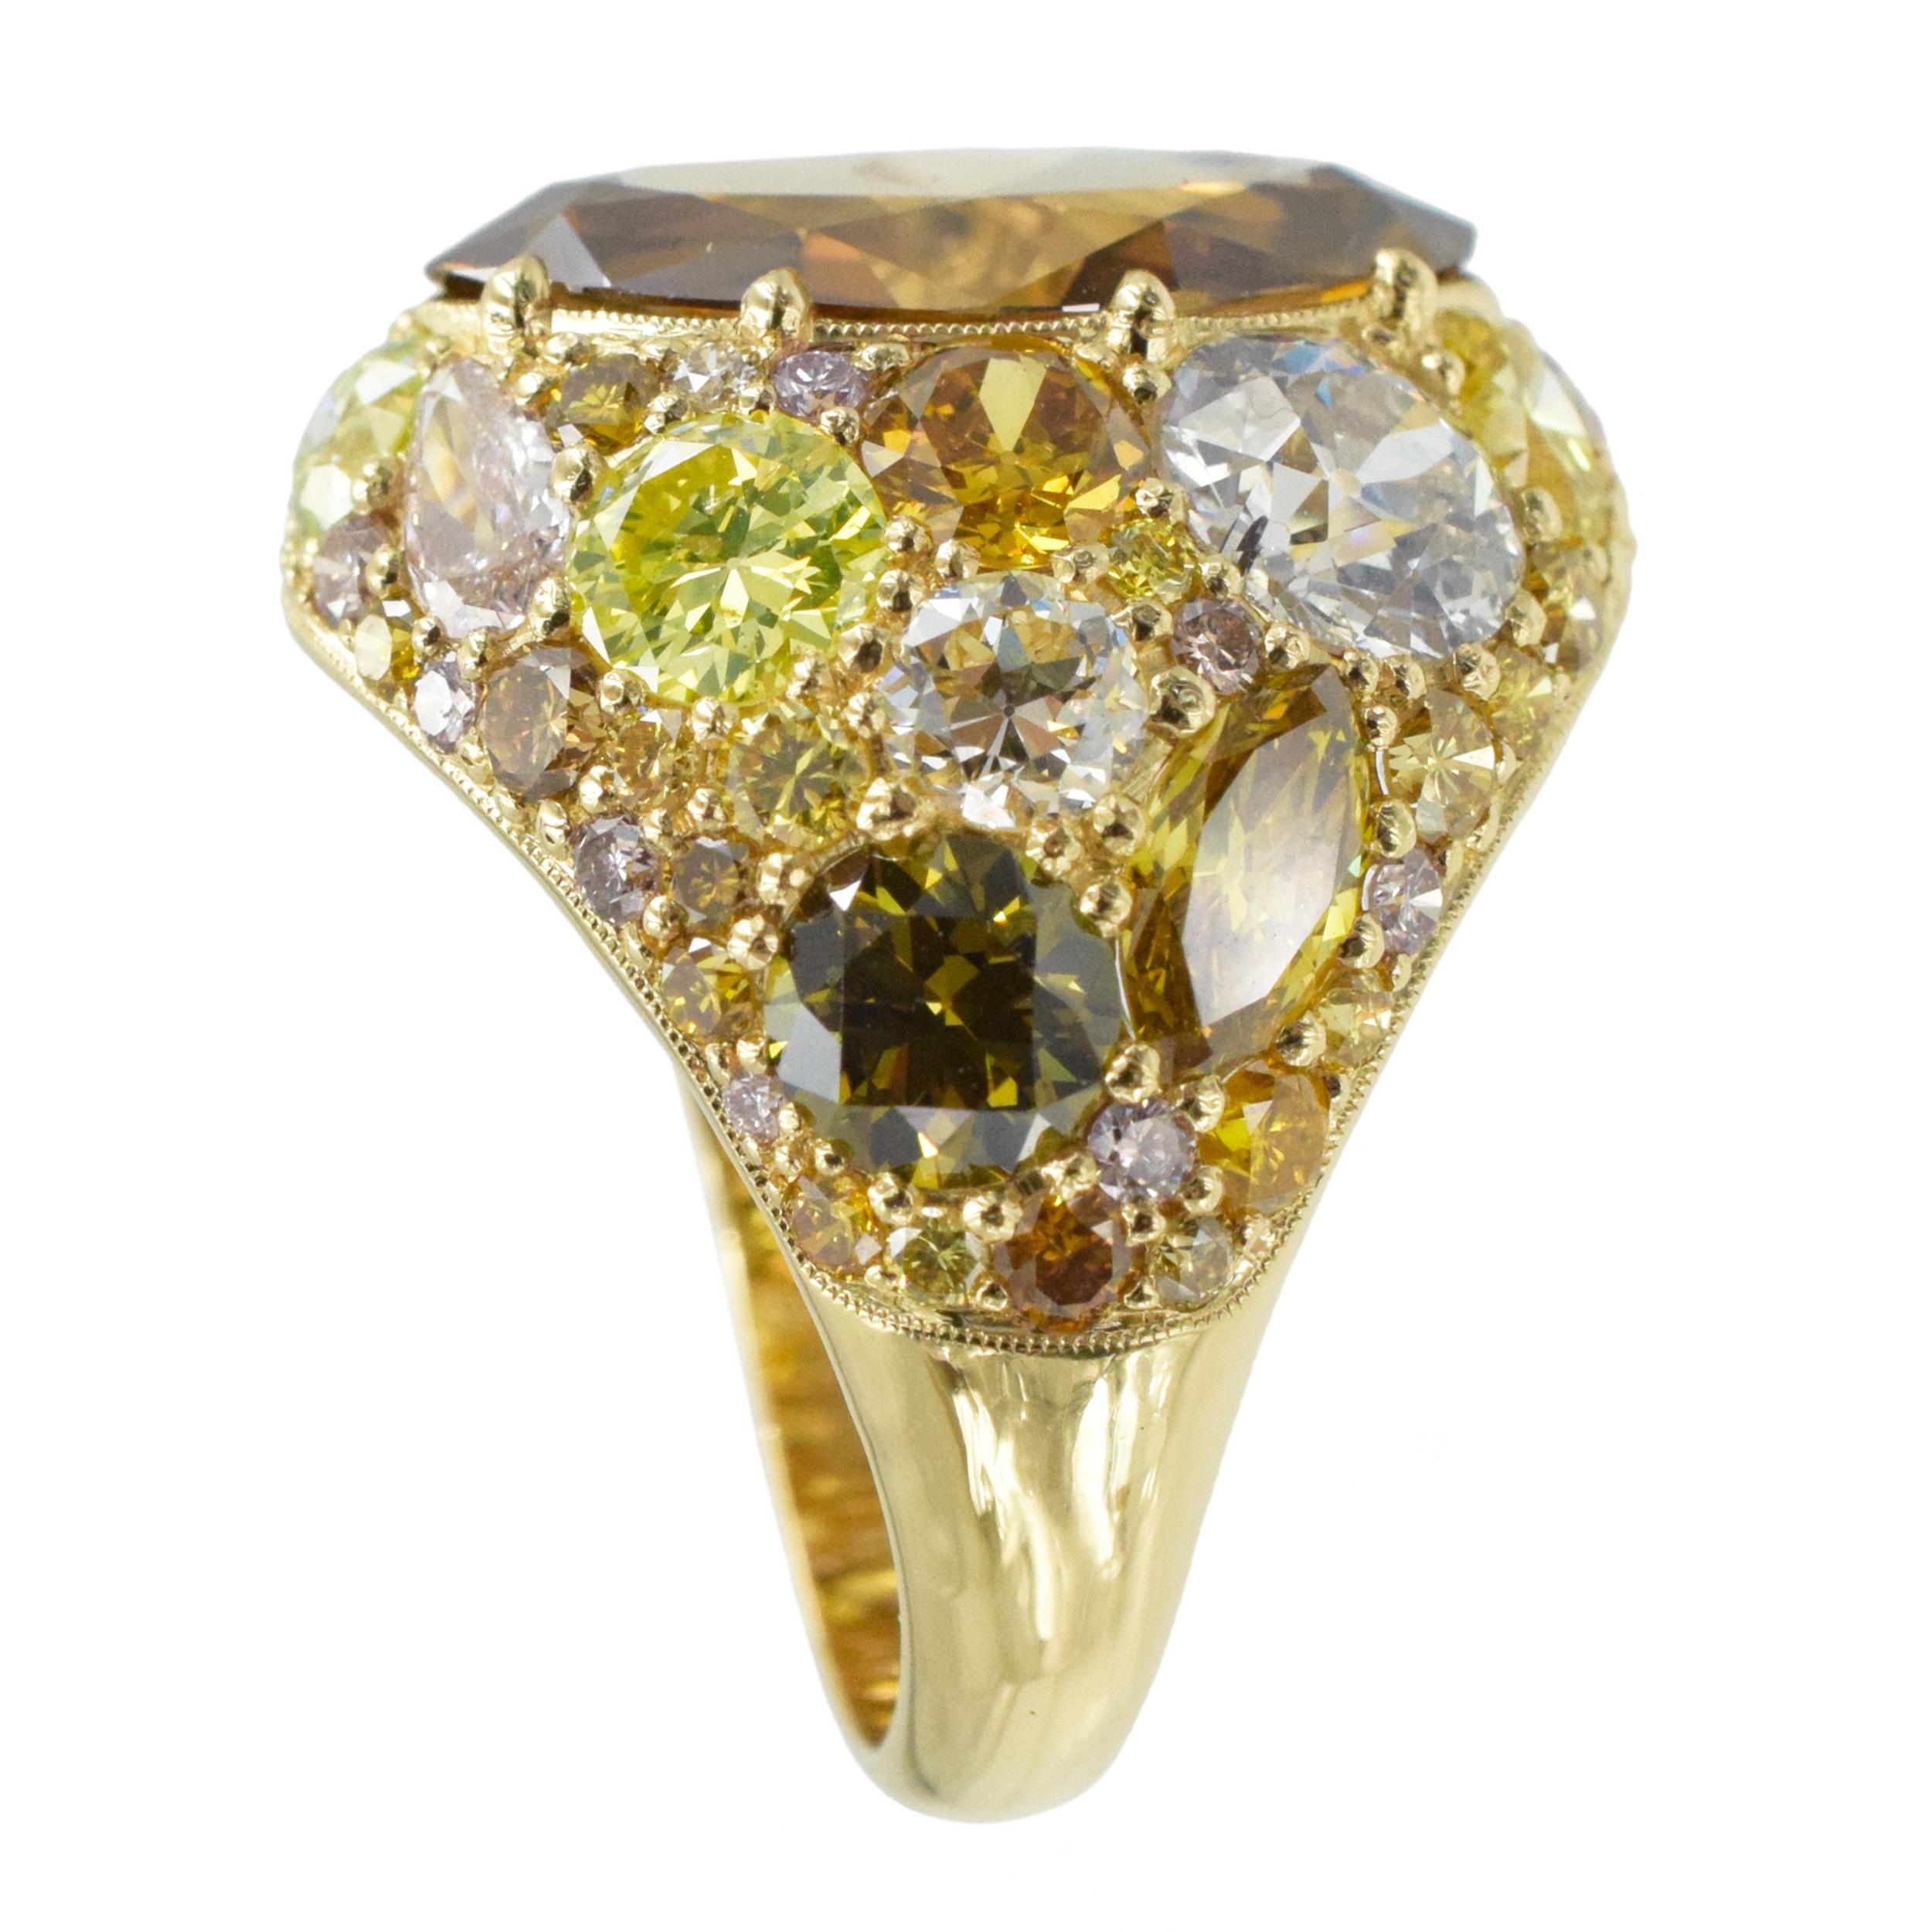 Colored Diamond and Yellow Gold Ring

This bombe style ring has 55 yellow round diamonds weighing a total of 1.35 carats, 18 various shape and color diamonds weighing 5.62ct (included 6 GIA certified, all natural colors), and a center diamond of